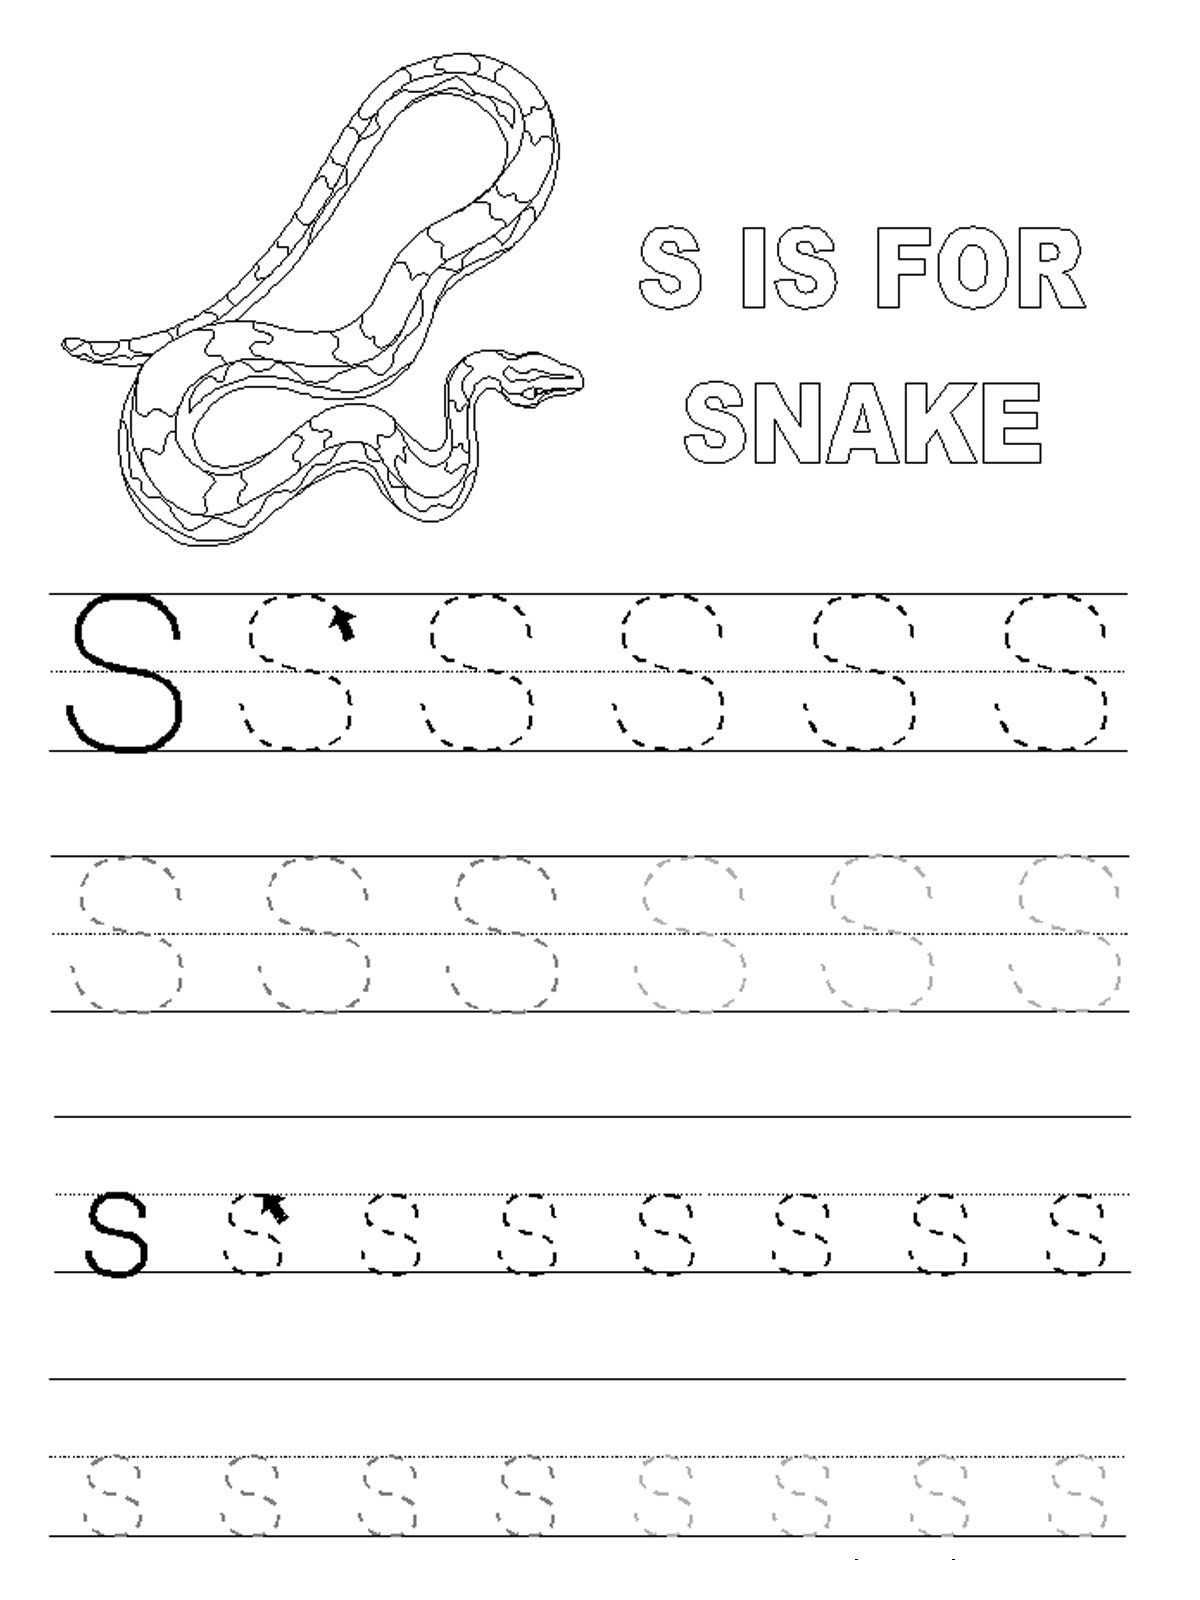 Traceable Letters Worksheet For Preschool Printable with regard to Letter S Tracing Worksheets Pdf